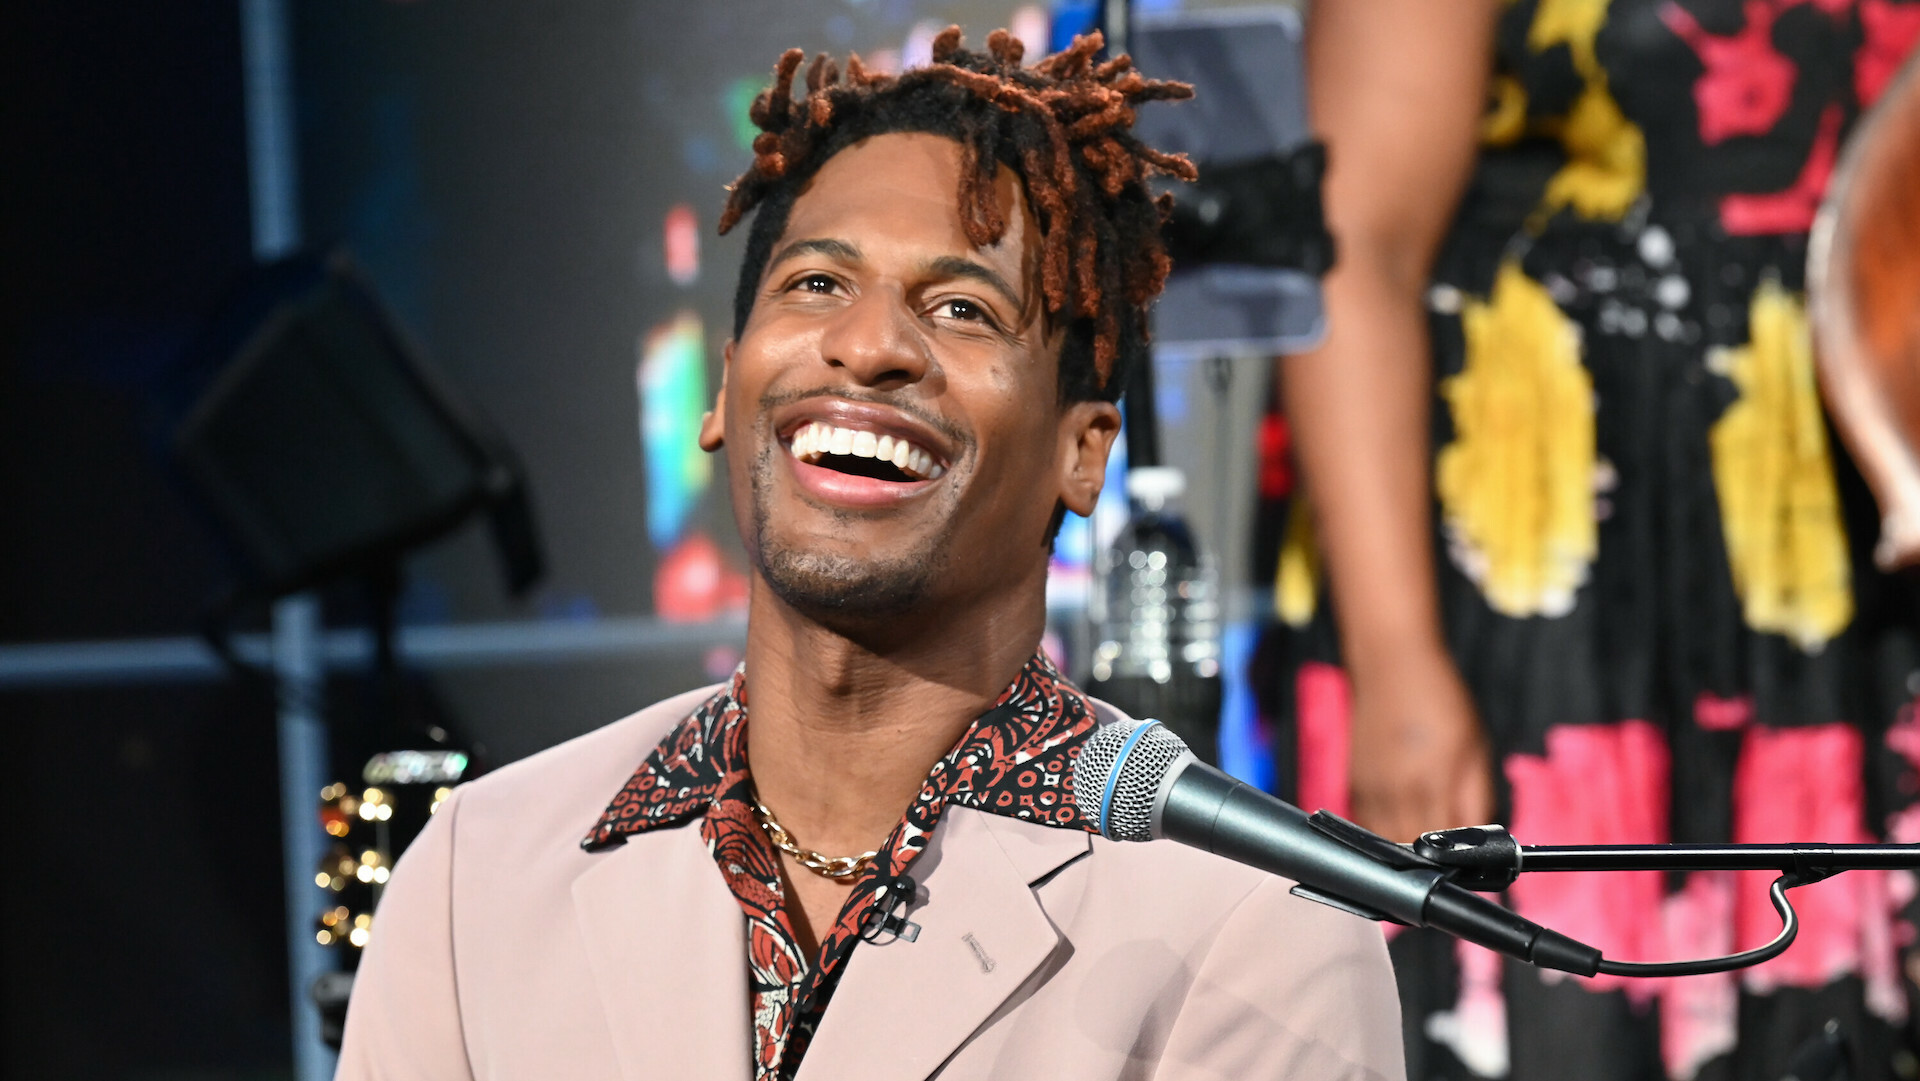 Jon Batiste is leaving ‘The Late Show’ after 7 years